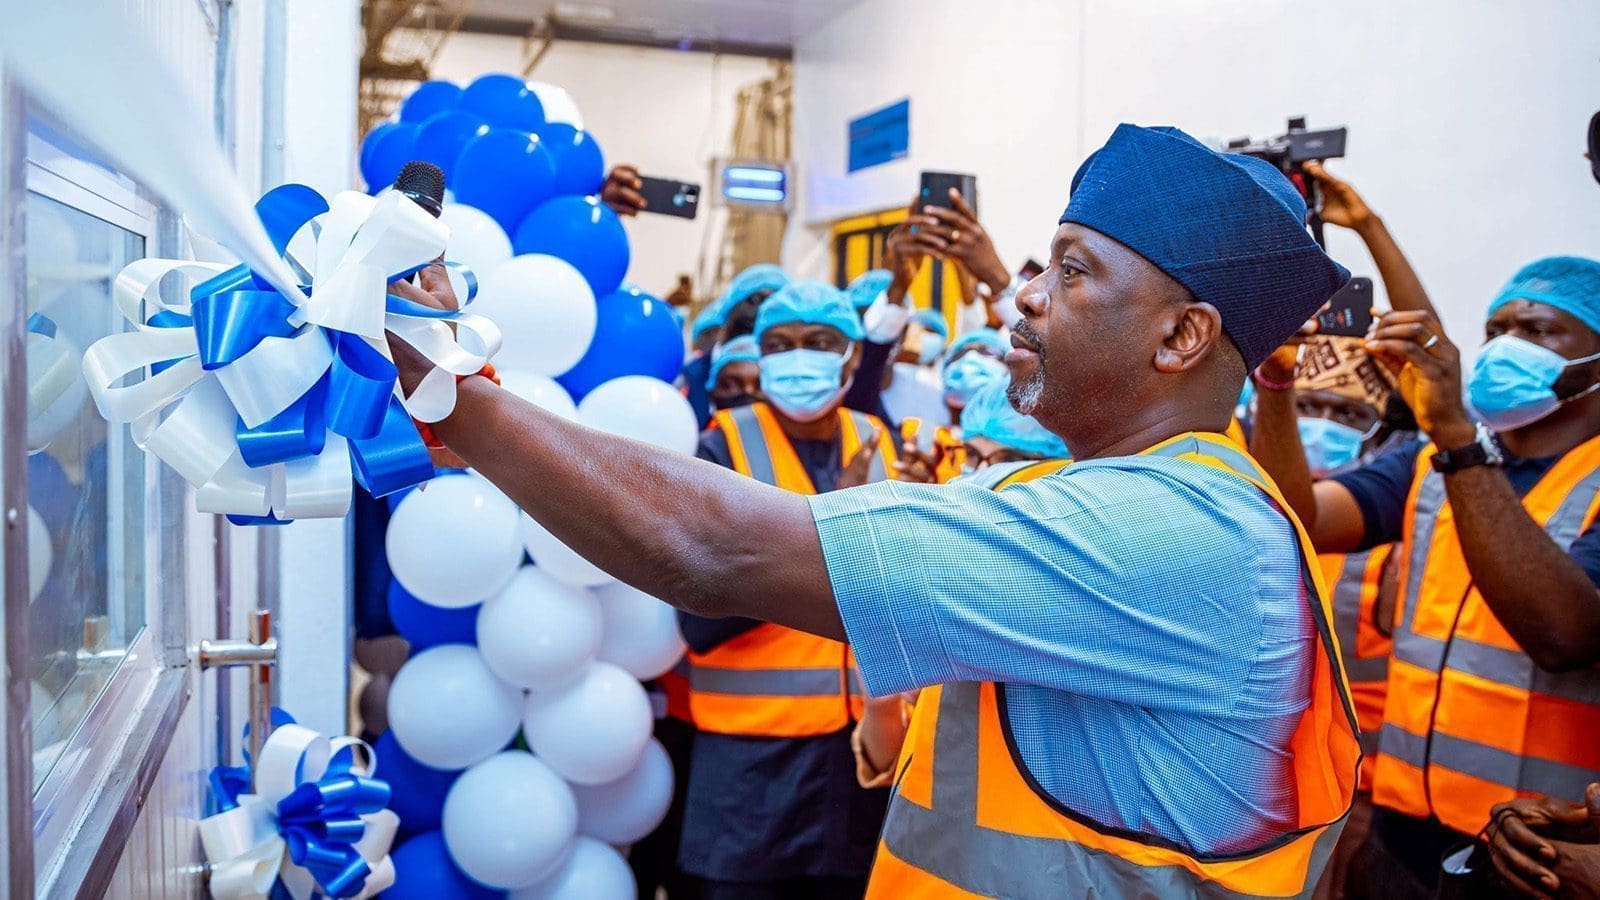 Danone celebrates 60 years in Nigeria with opening of Fan Milk’s new US$9m facility